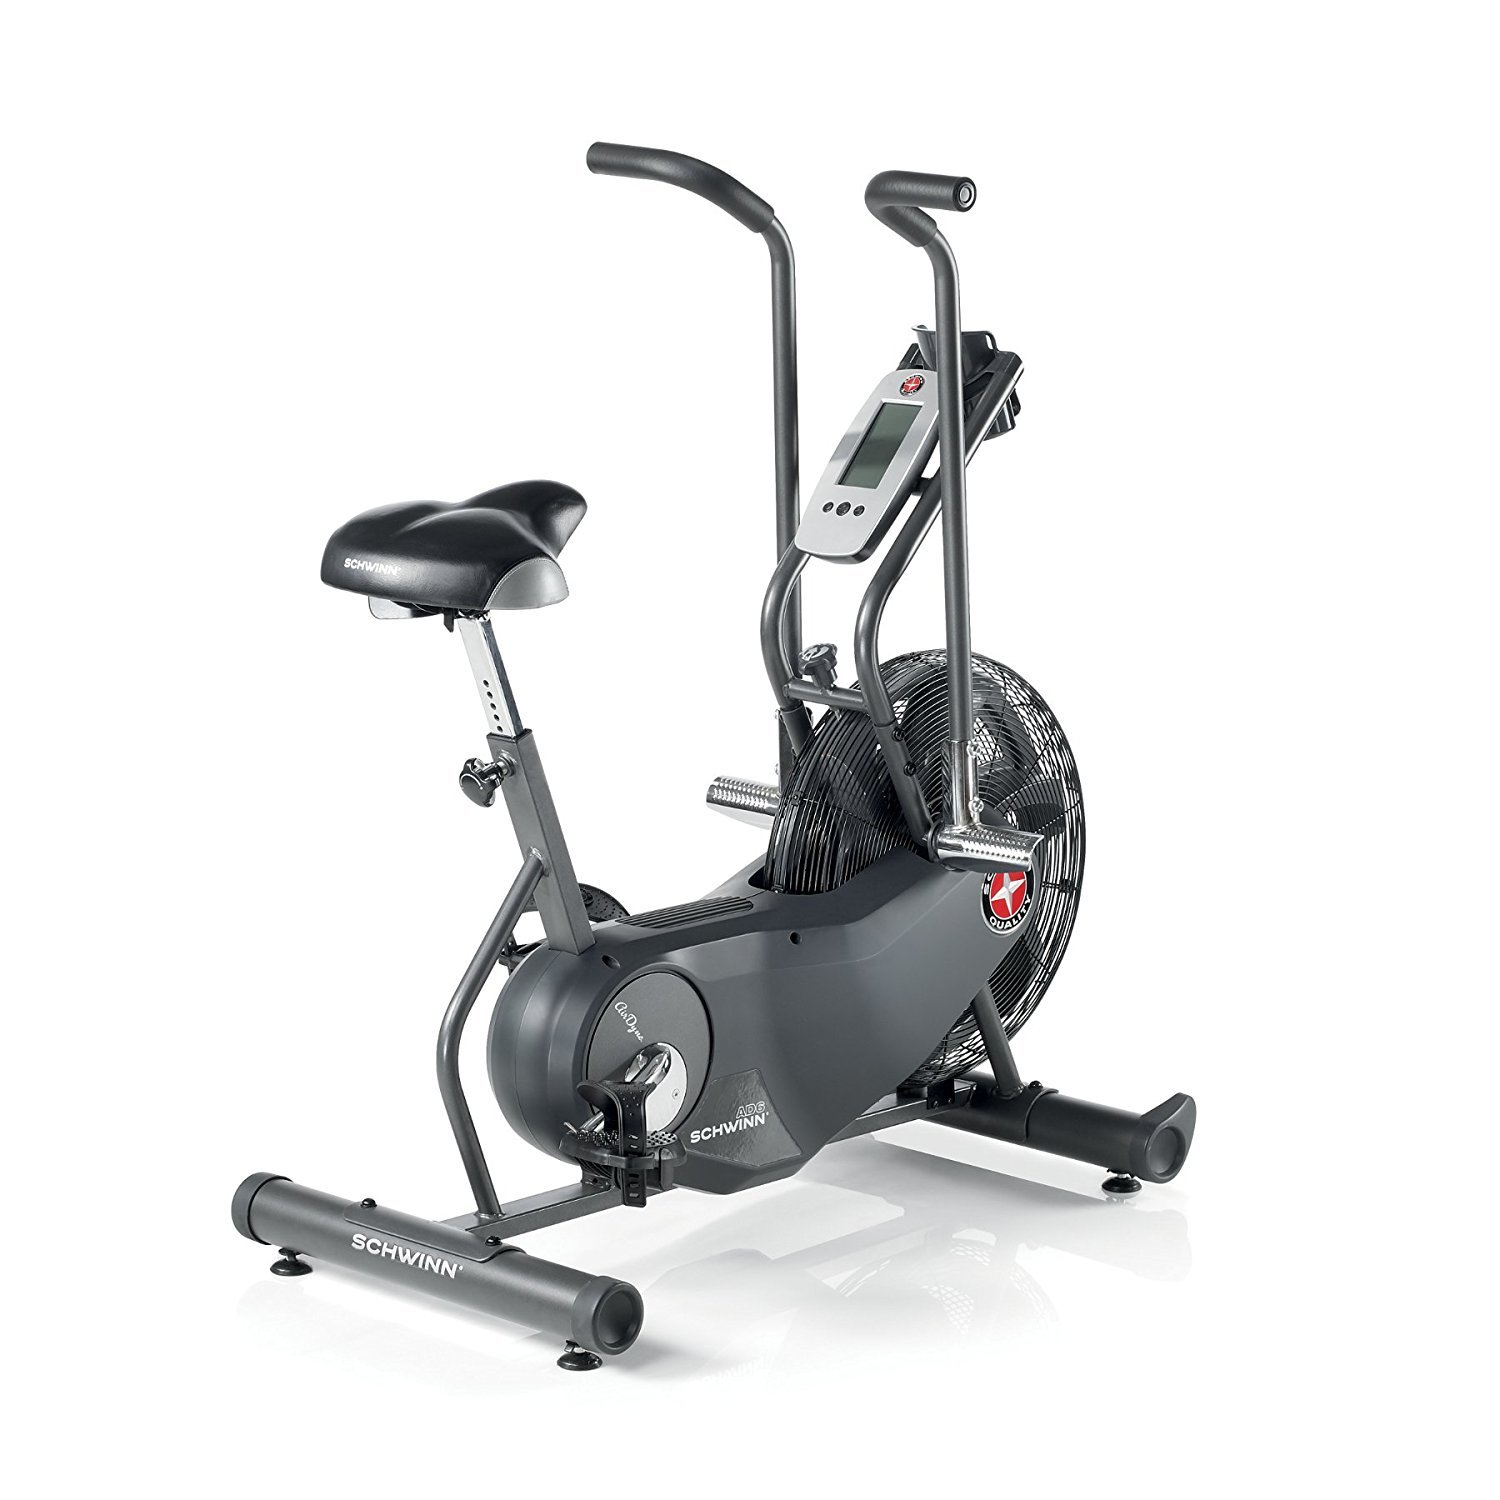 can you spot the Schwinn AD6 Airdyne Upright Exercise Bike shown here? its the best upright exercise bike available